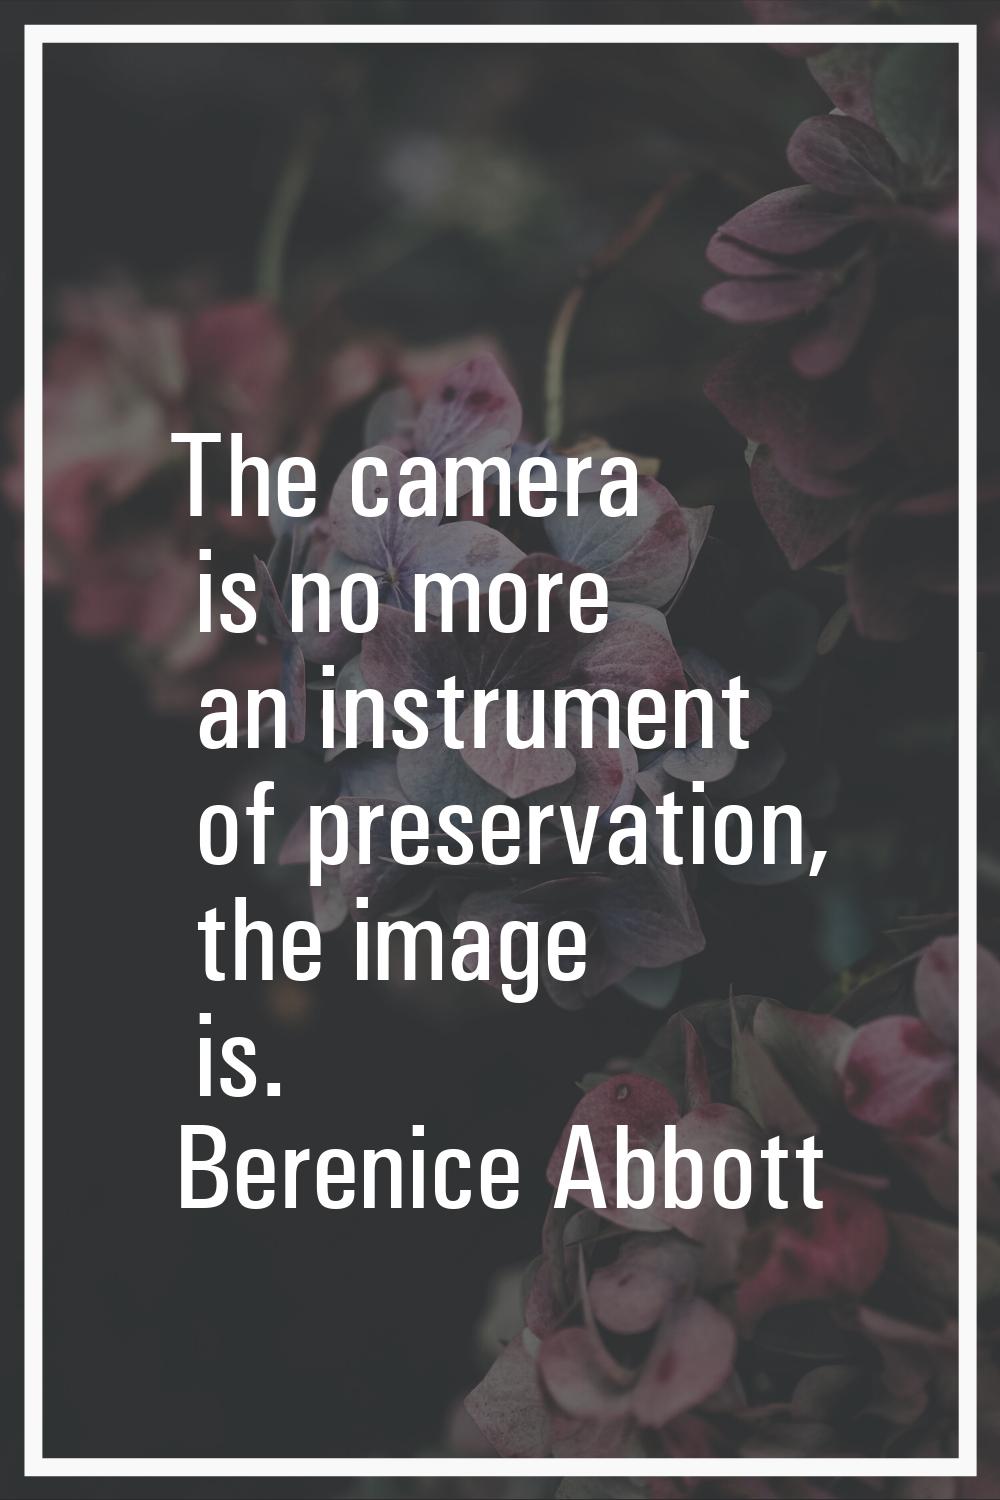 The camera is no more an instrument of preservation, the image is.